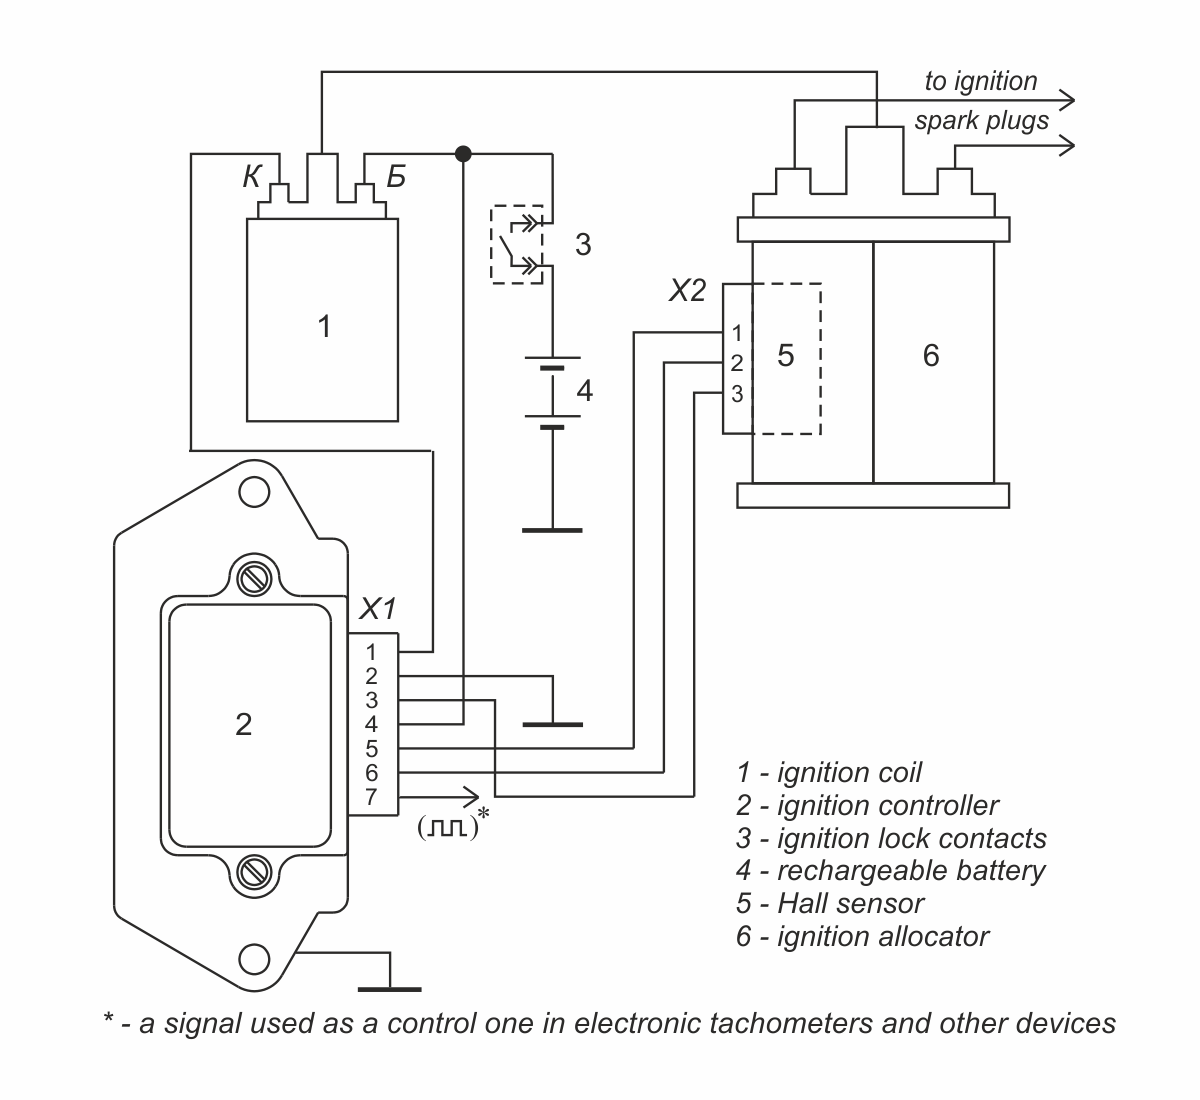 Connection diagram of ignition controller 3640.3734